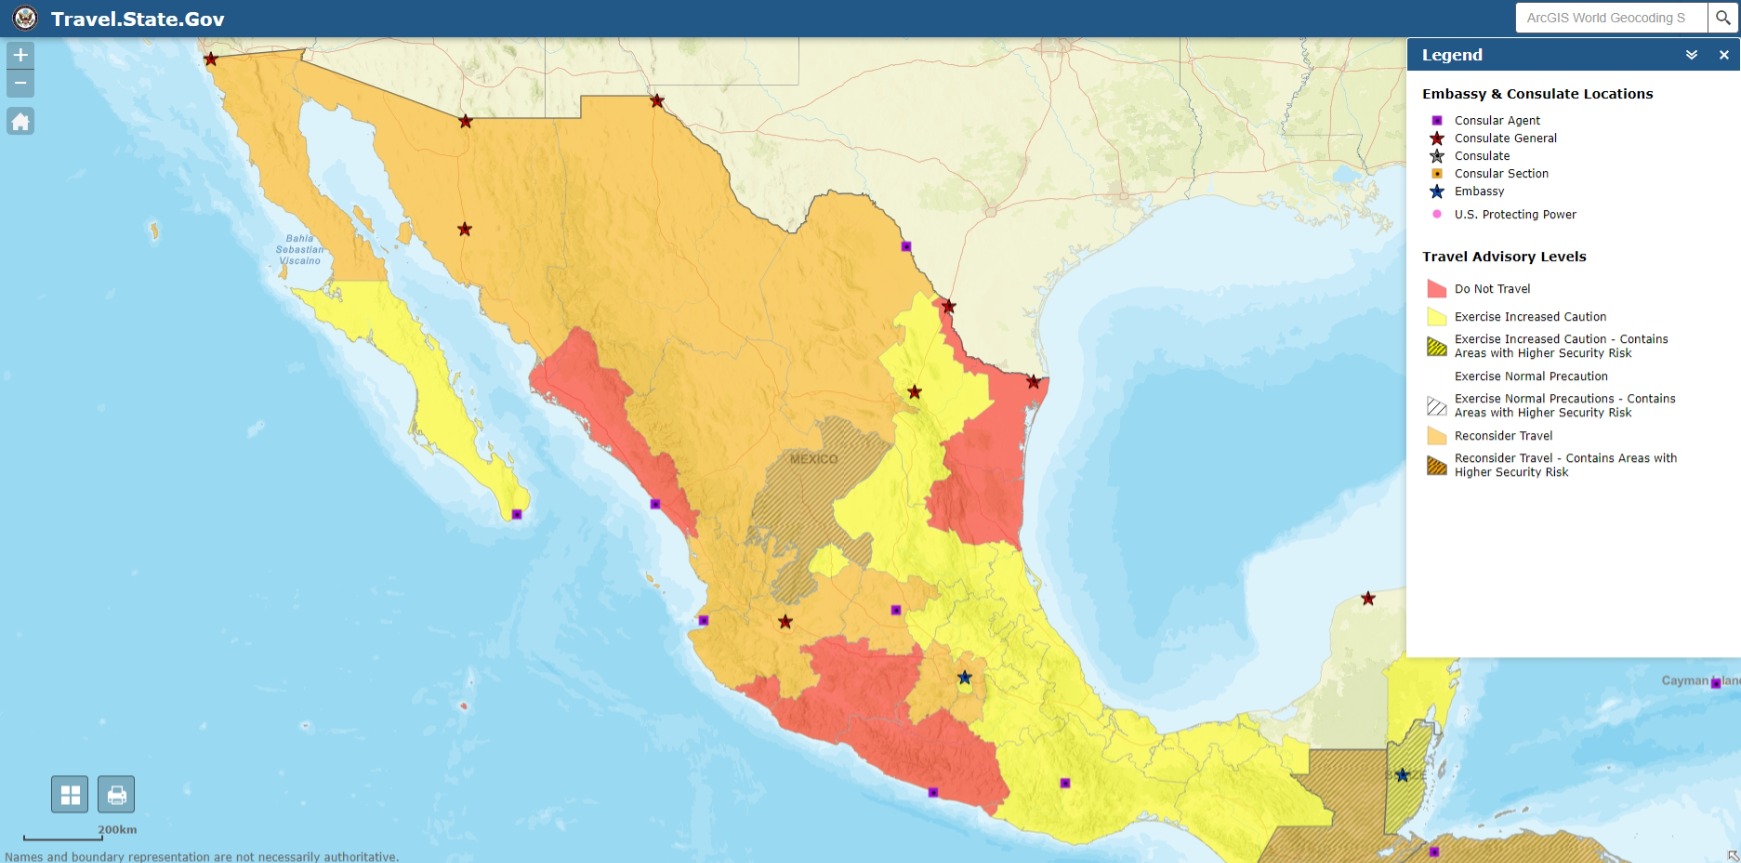 Mexico map shared by the State Department recommending US citizens to avoid travels to Mexico during Spring Break.